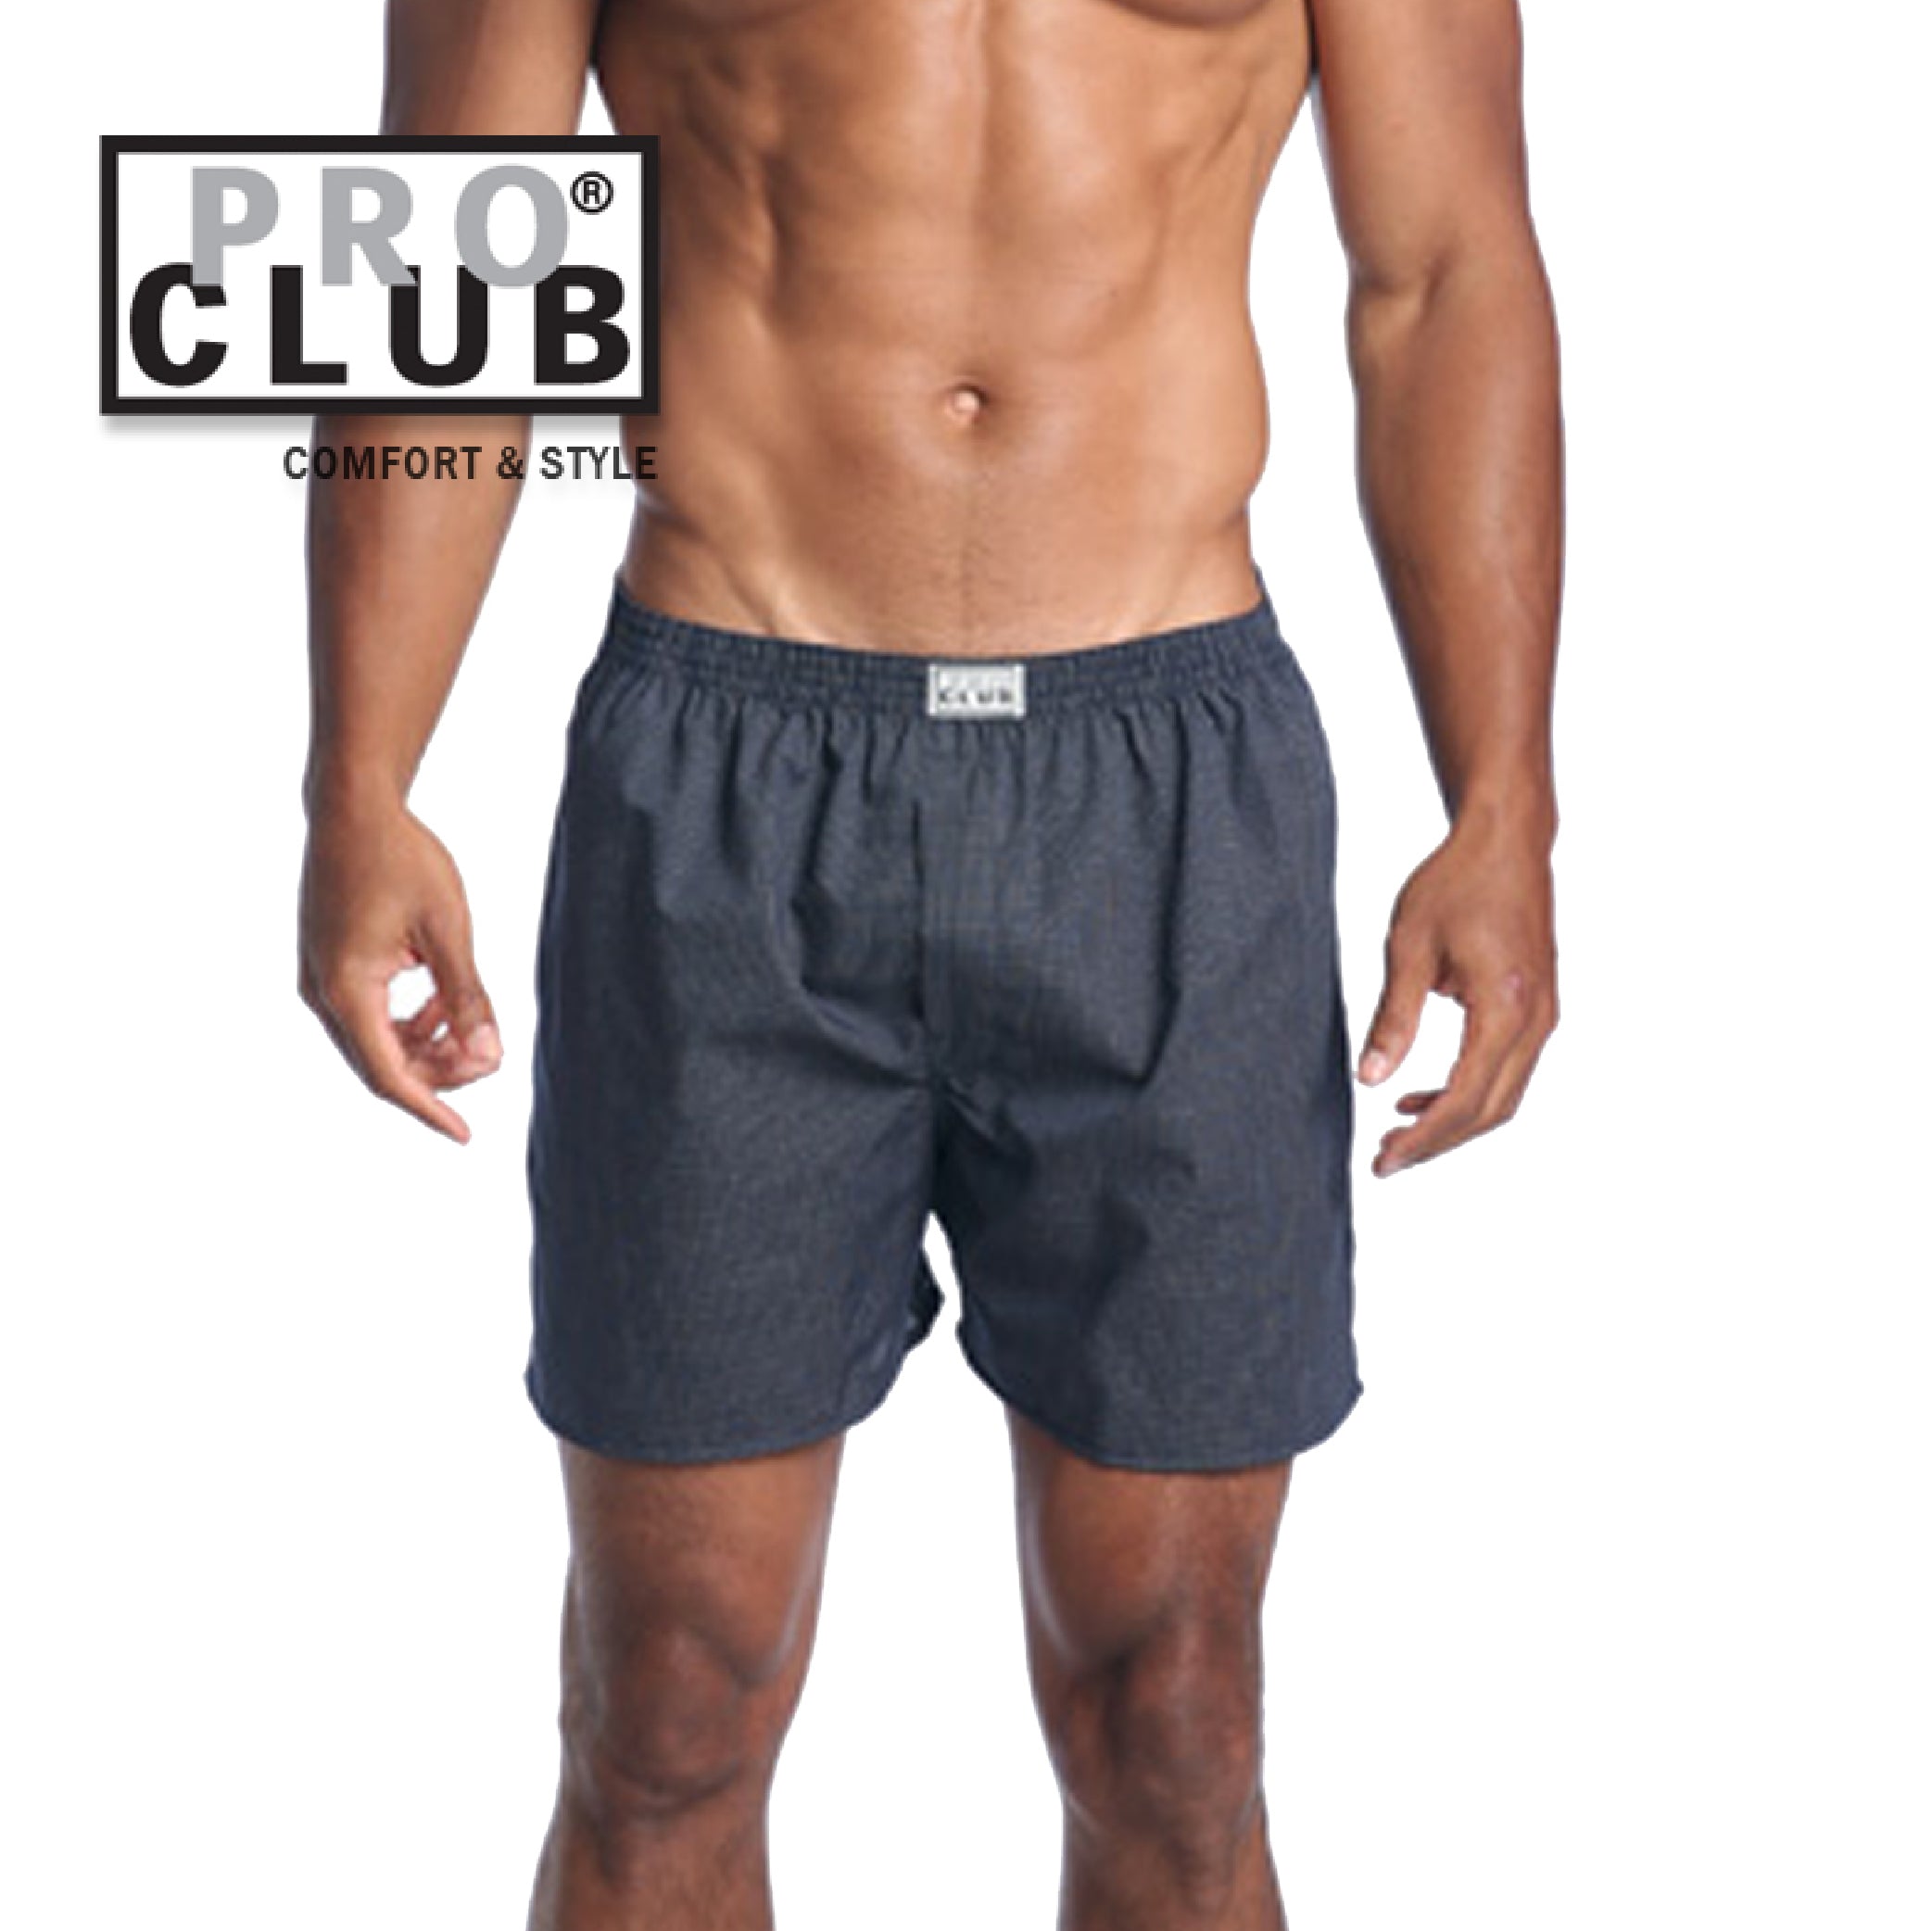 Buy Pro Club Compression Boxer Briefs - 2 Pack at Ubuy Palestine